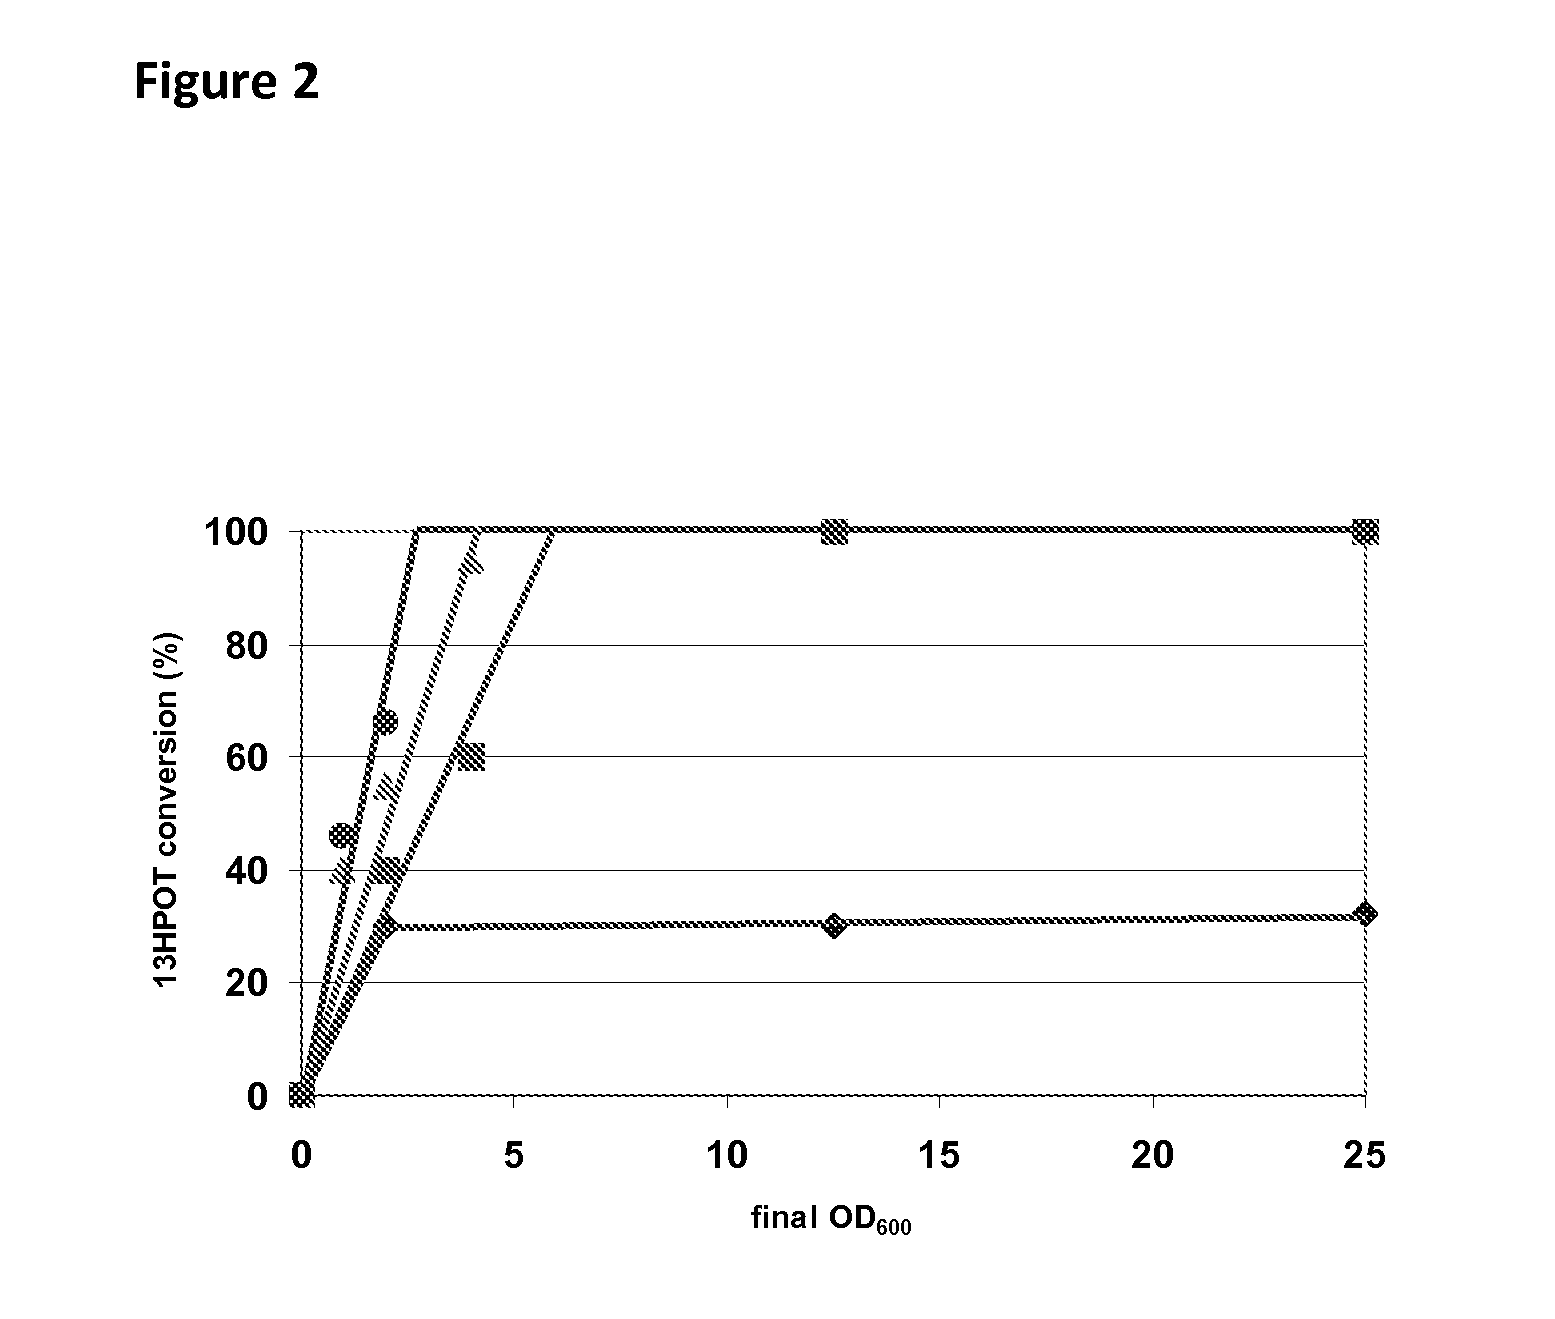 Modified 13-hydroperoxide lyases and uses thereof